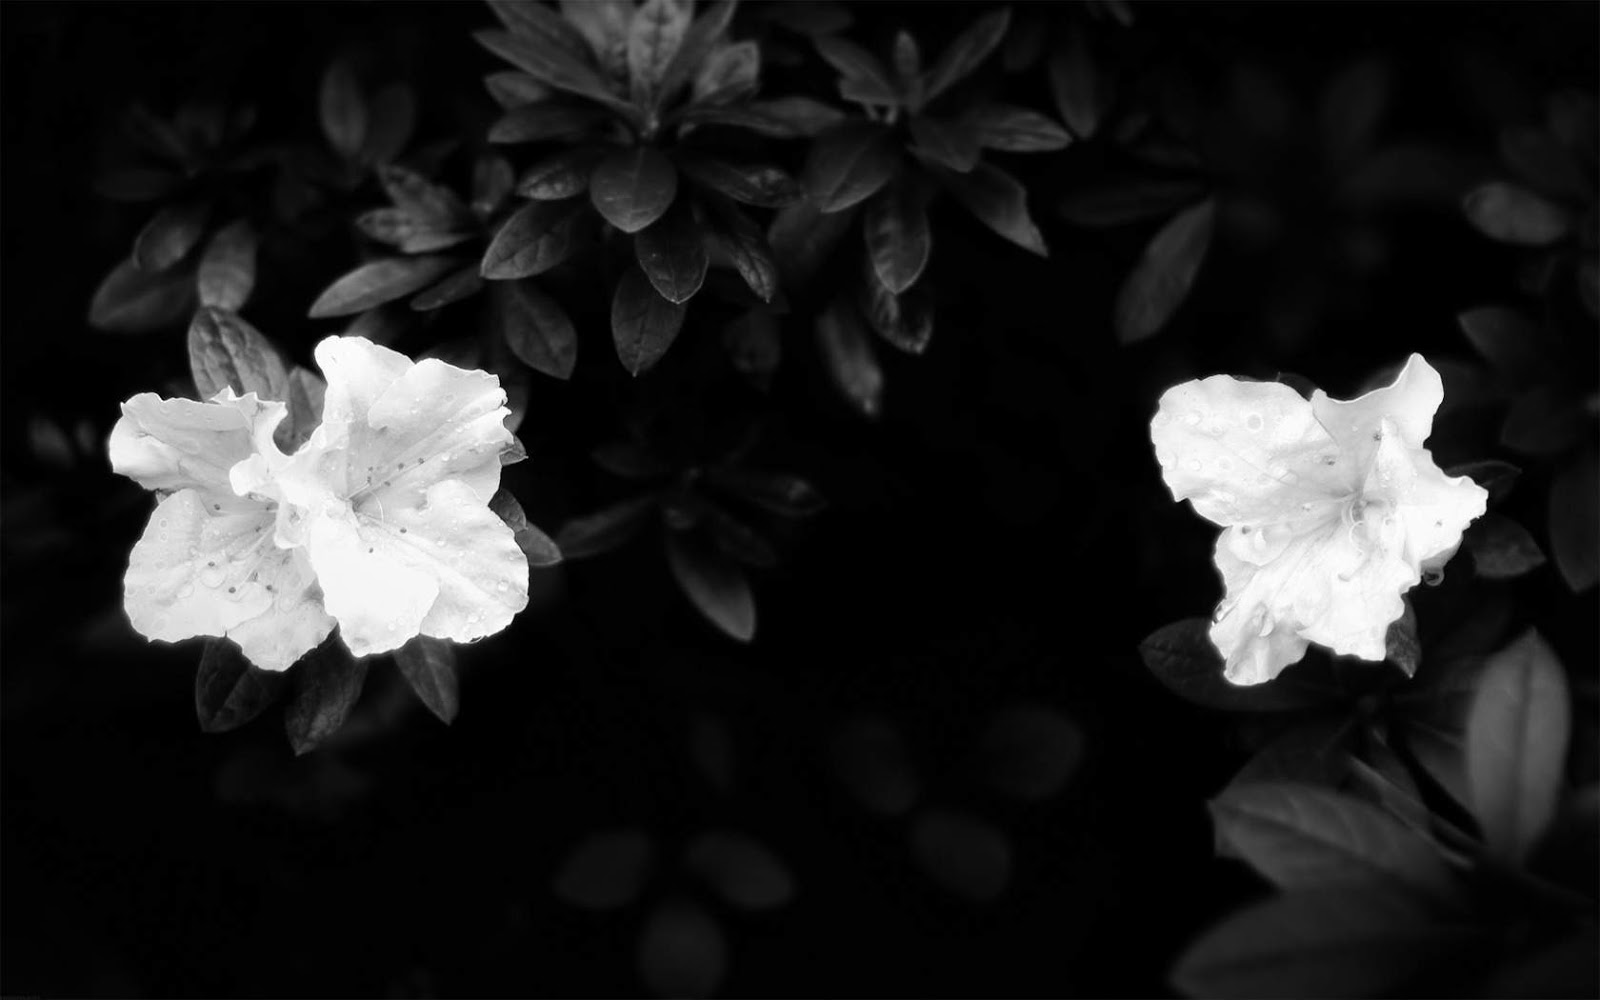 Download wallpaper 240x320 flowers black and white black old mobile cell  phone smartphone hd background